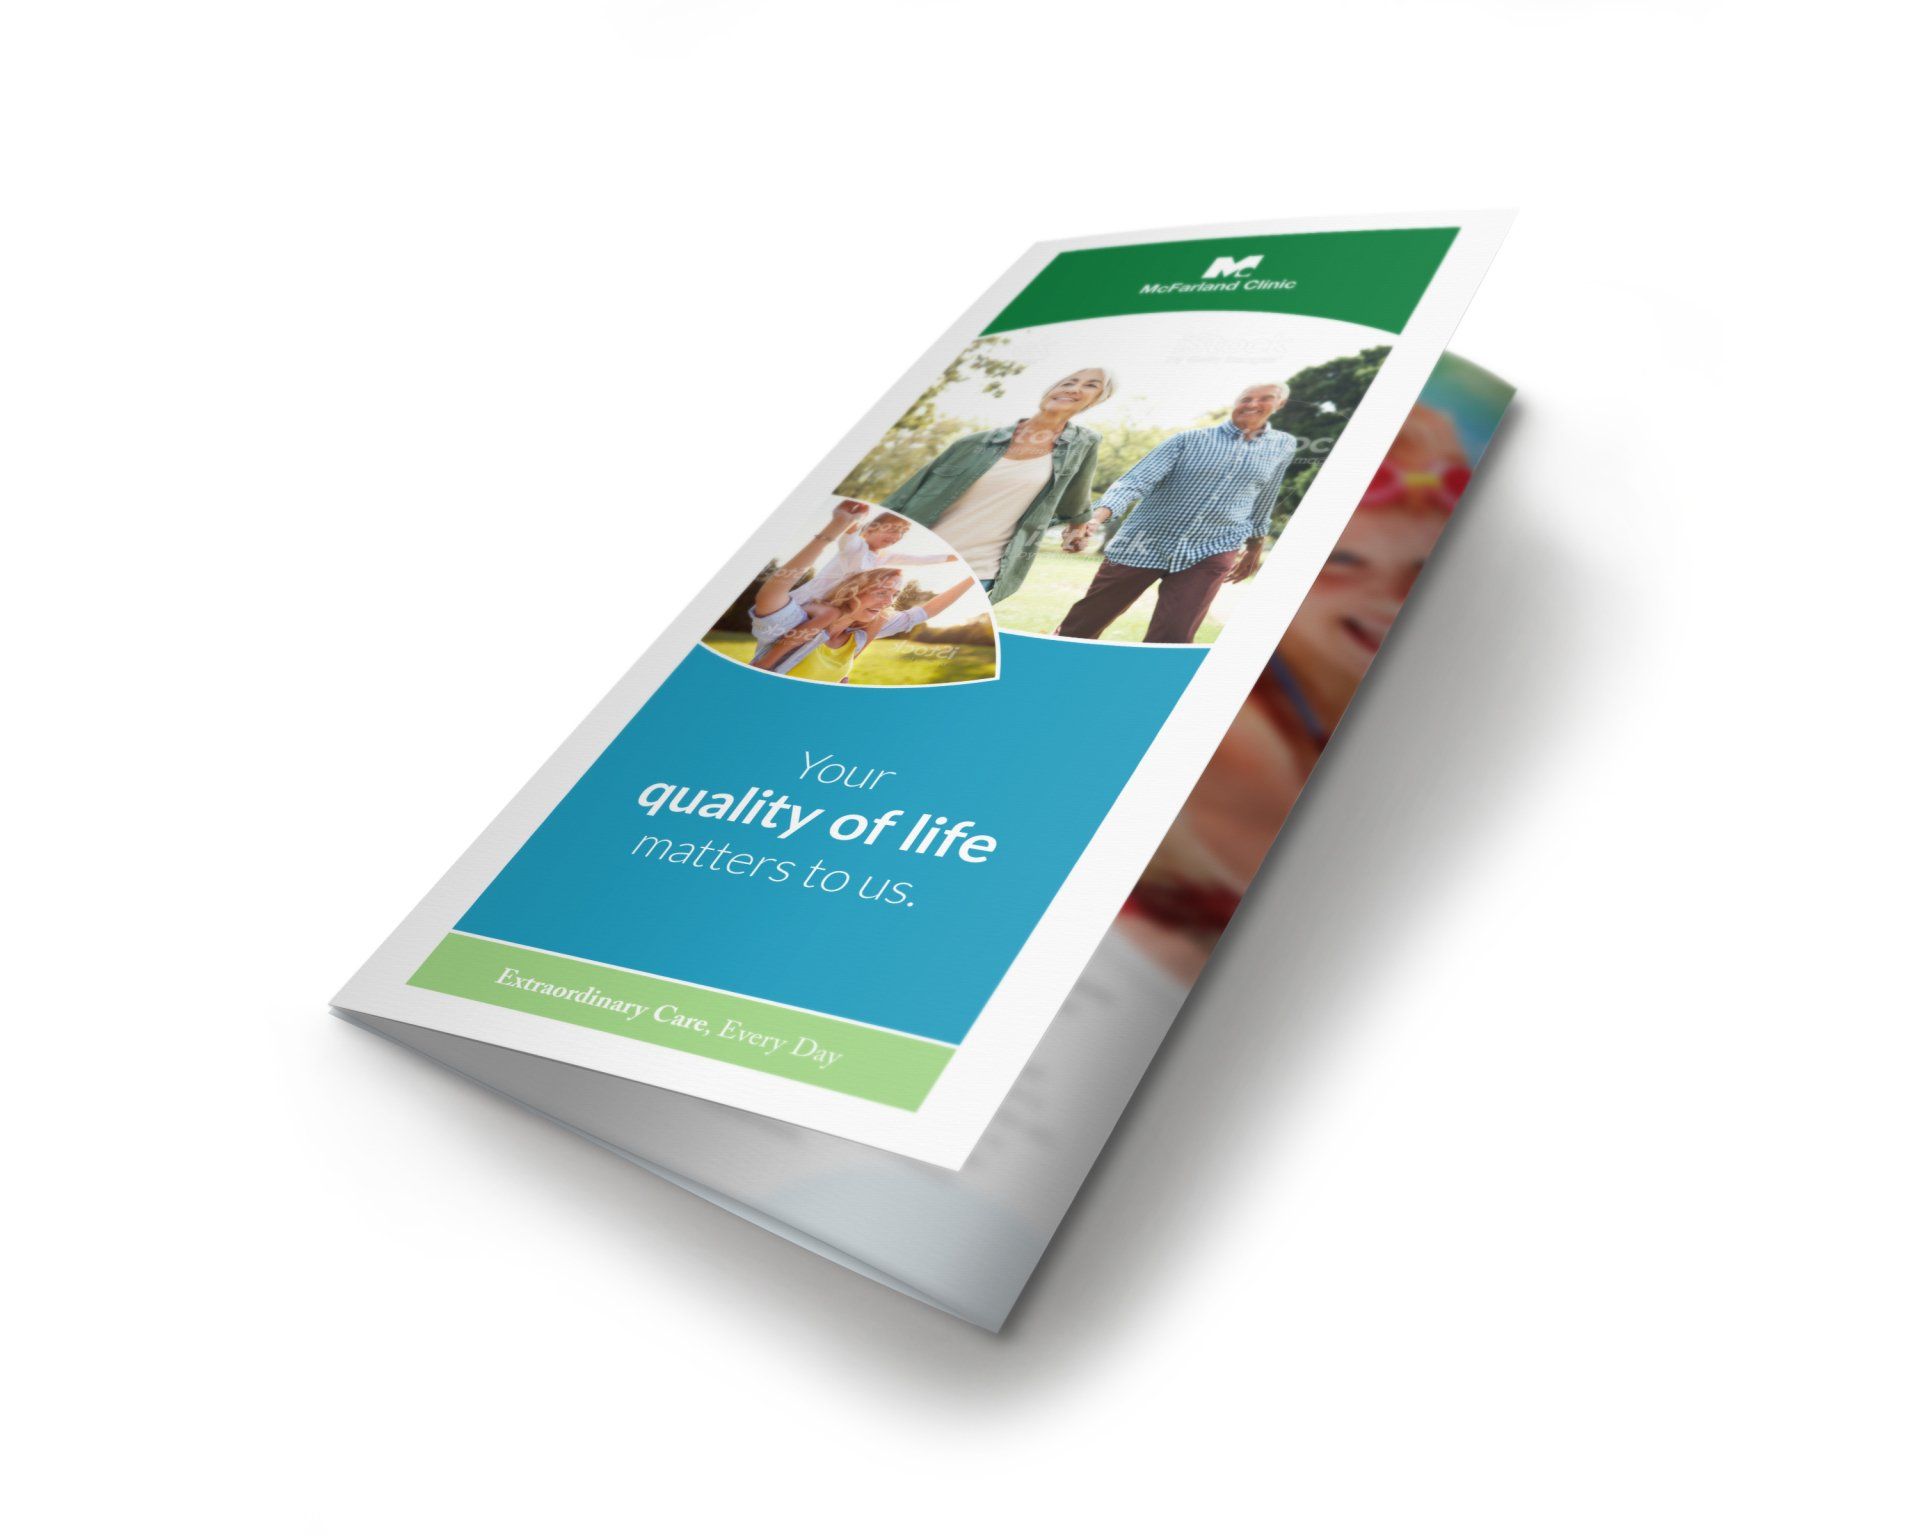 A brochure that says your quality of life on it